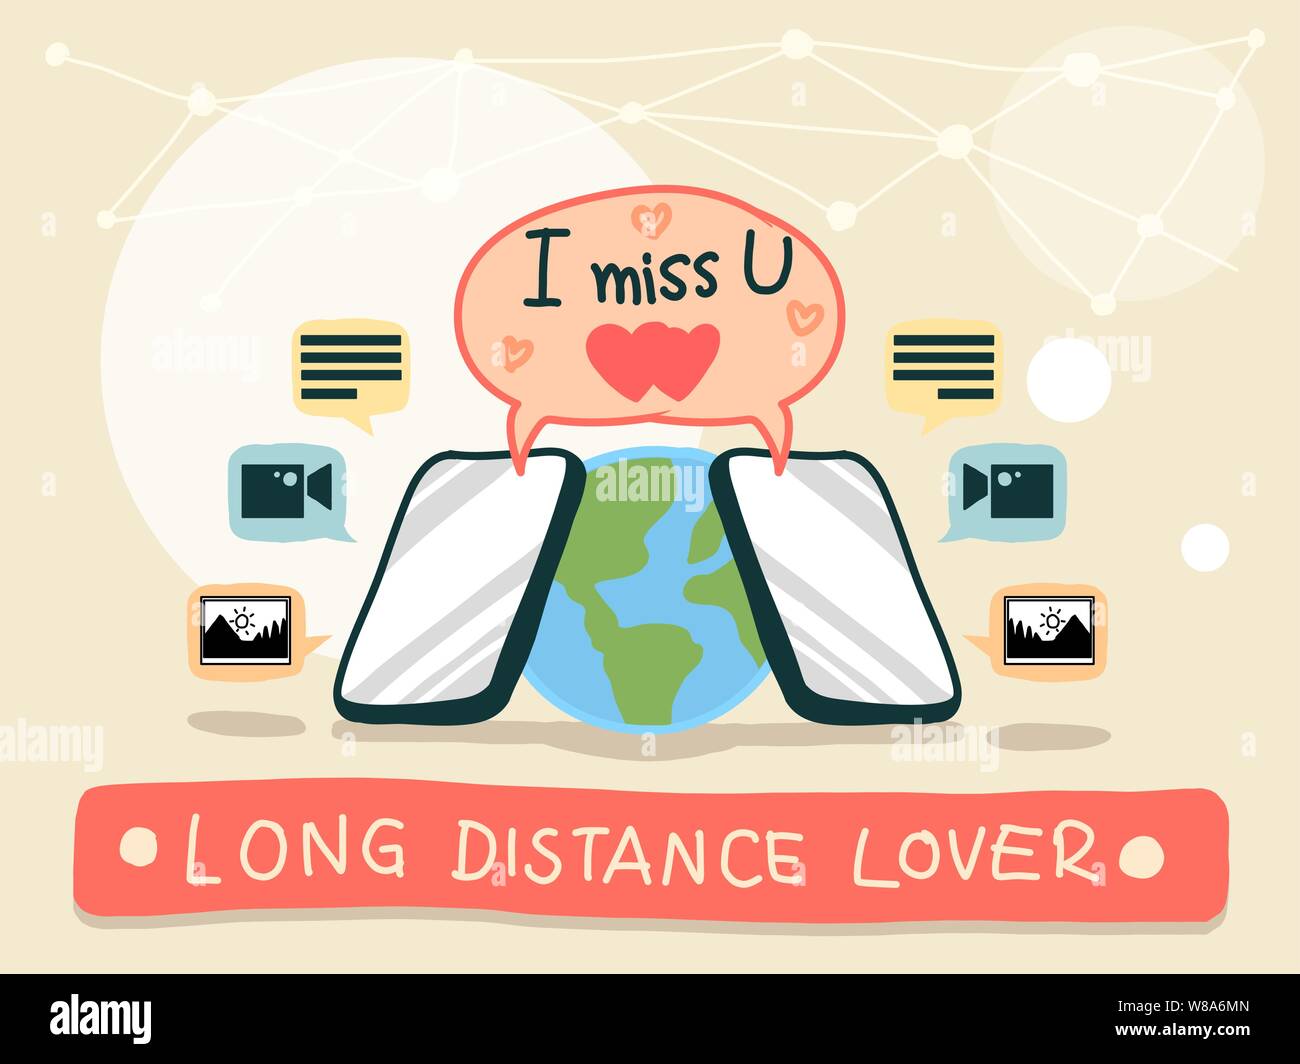 Long distance relationship now closer by Smartphone and internet. Drawing free hand vector illustration with separate layers Stock Vector